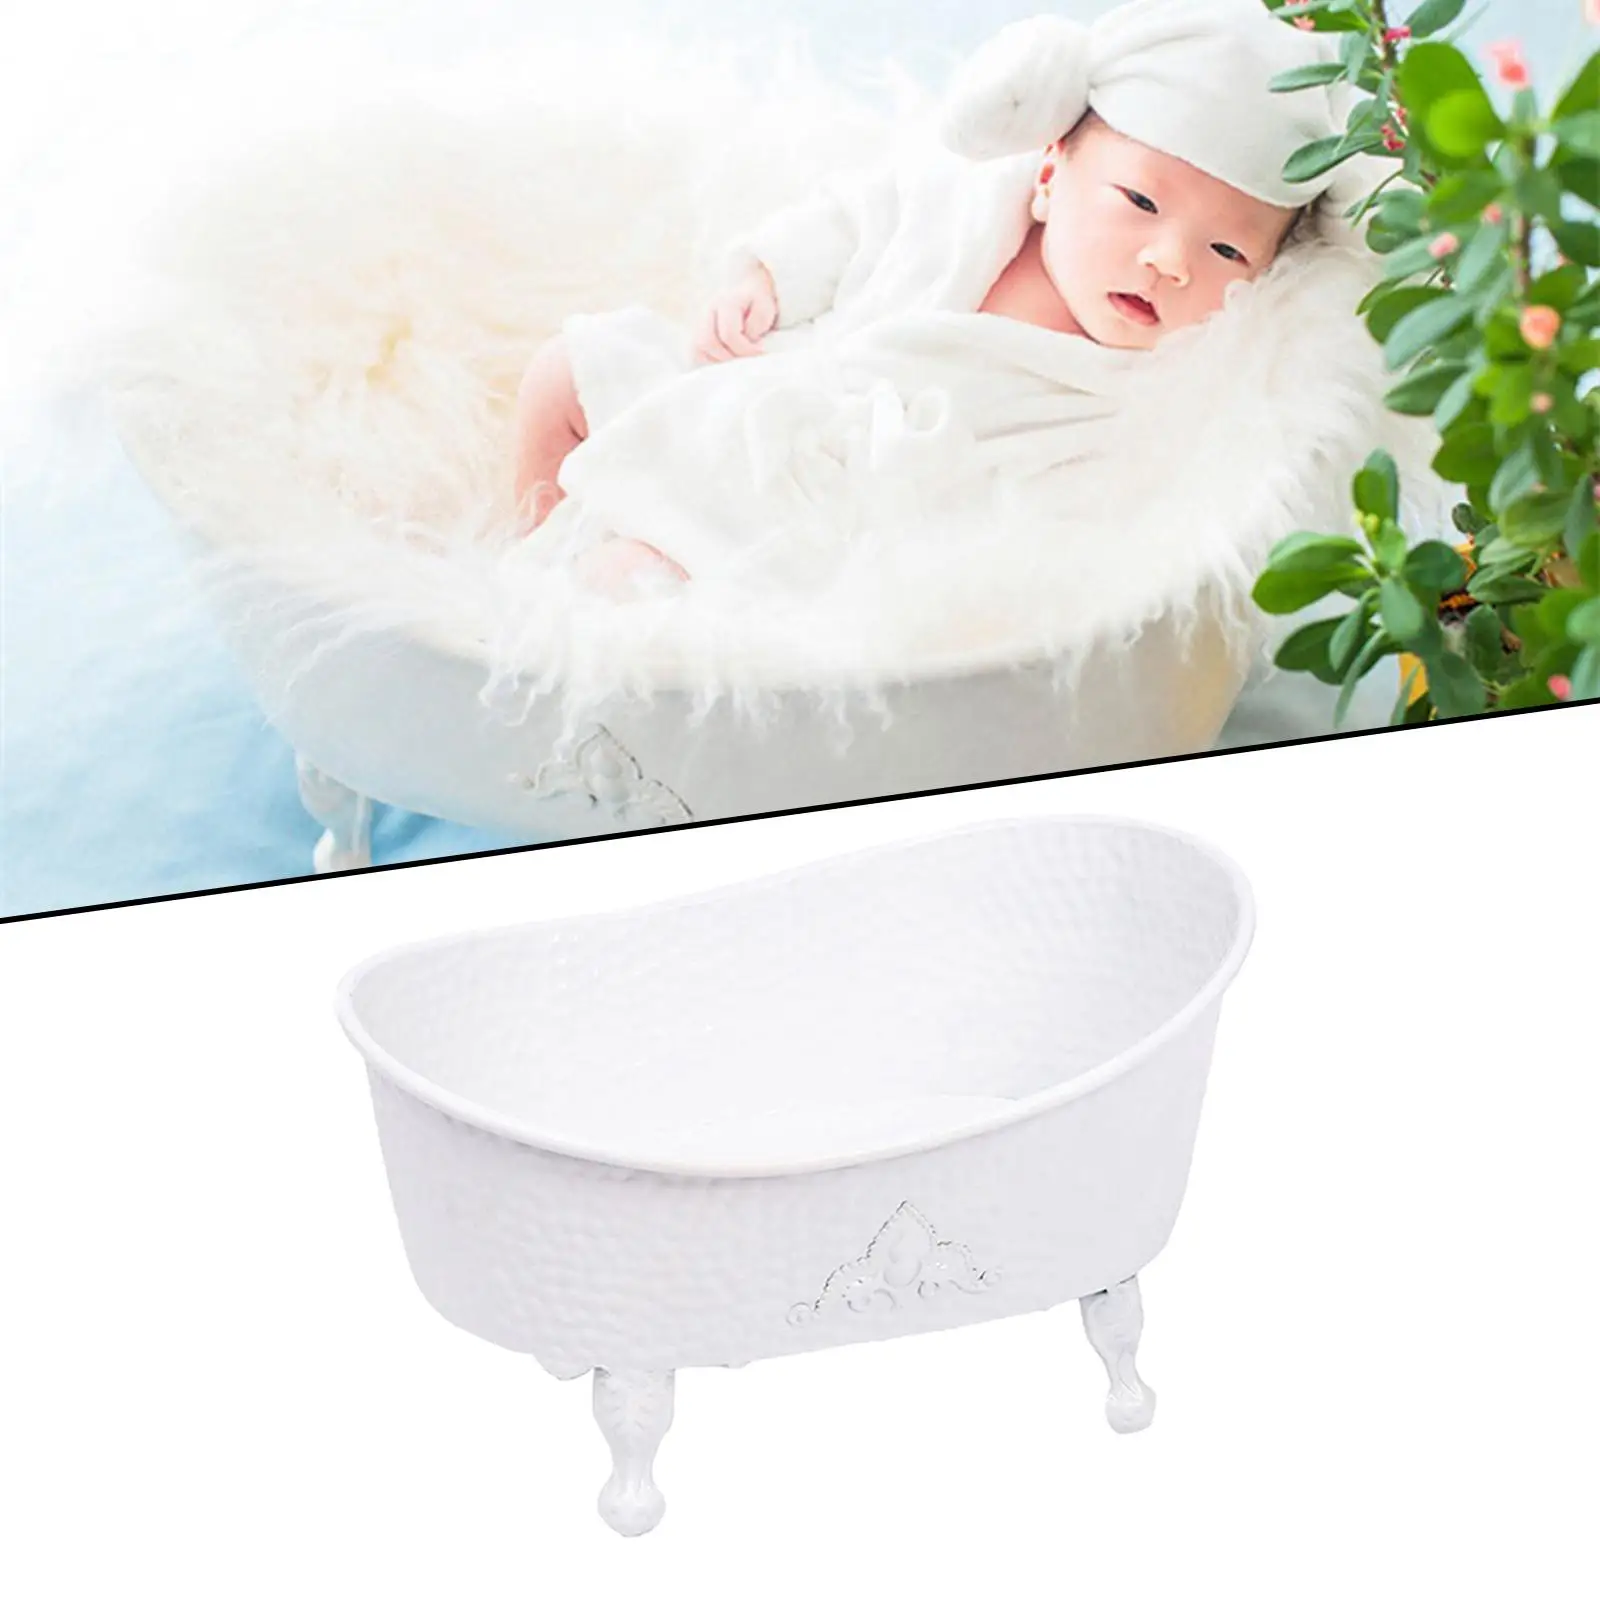 Photo Props Bathtub Decor Background Accs Furniture for Studio Props Holiday